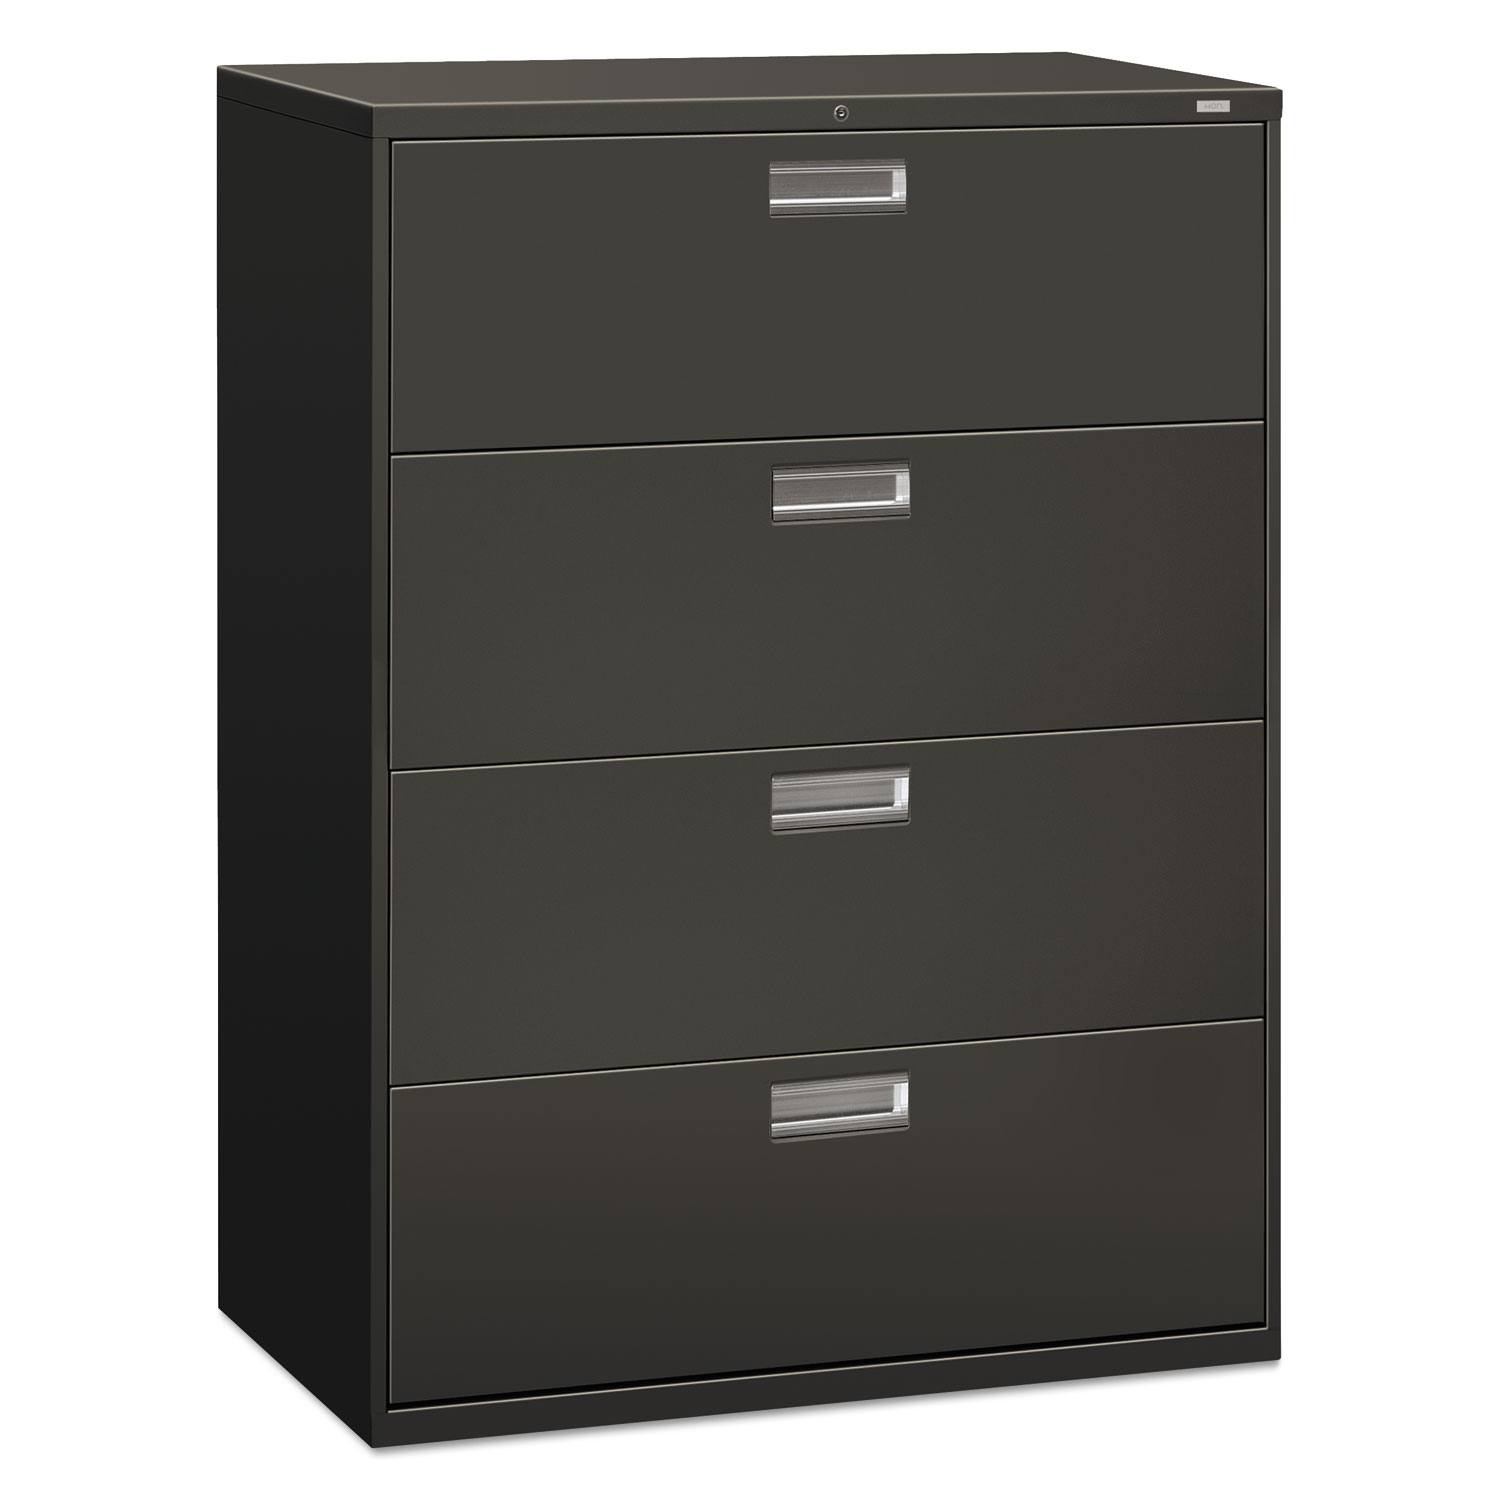 600 Series Four-Drawer Lateral File, 42w x 19-1/4d, Charcoal